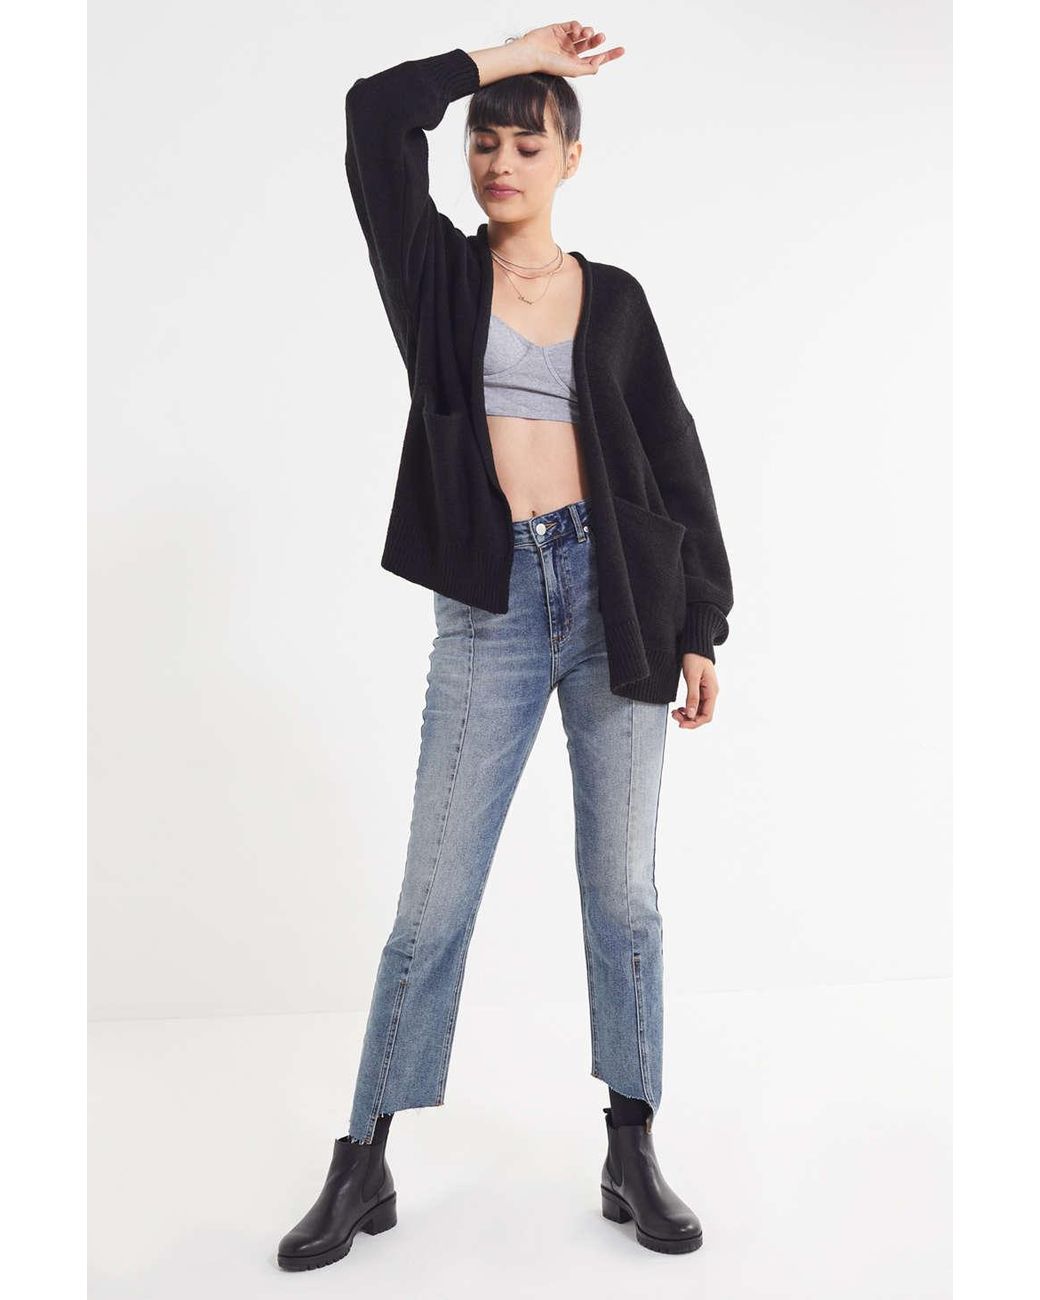 Urban Outfitters Uo Colie Oversized Open-front Cardigan in Black | Lyst